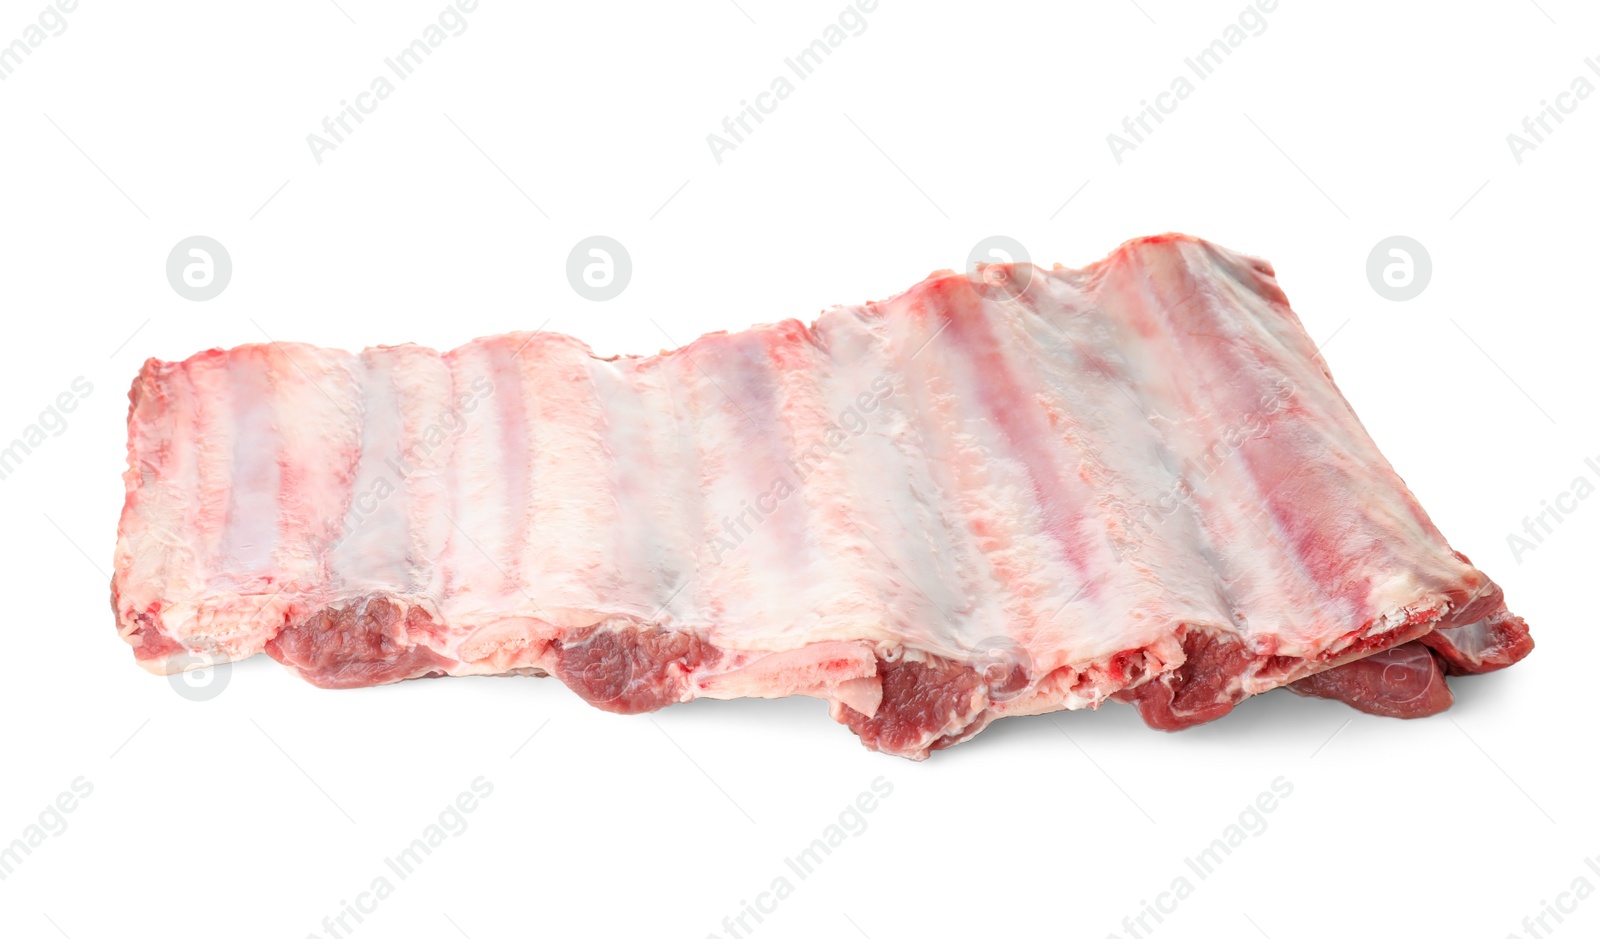 Photo of Raw ribs on white background. Fresh meat